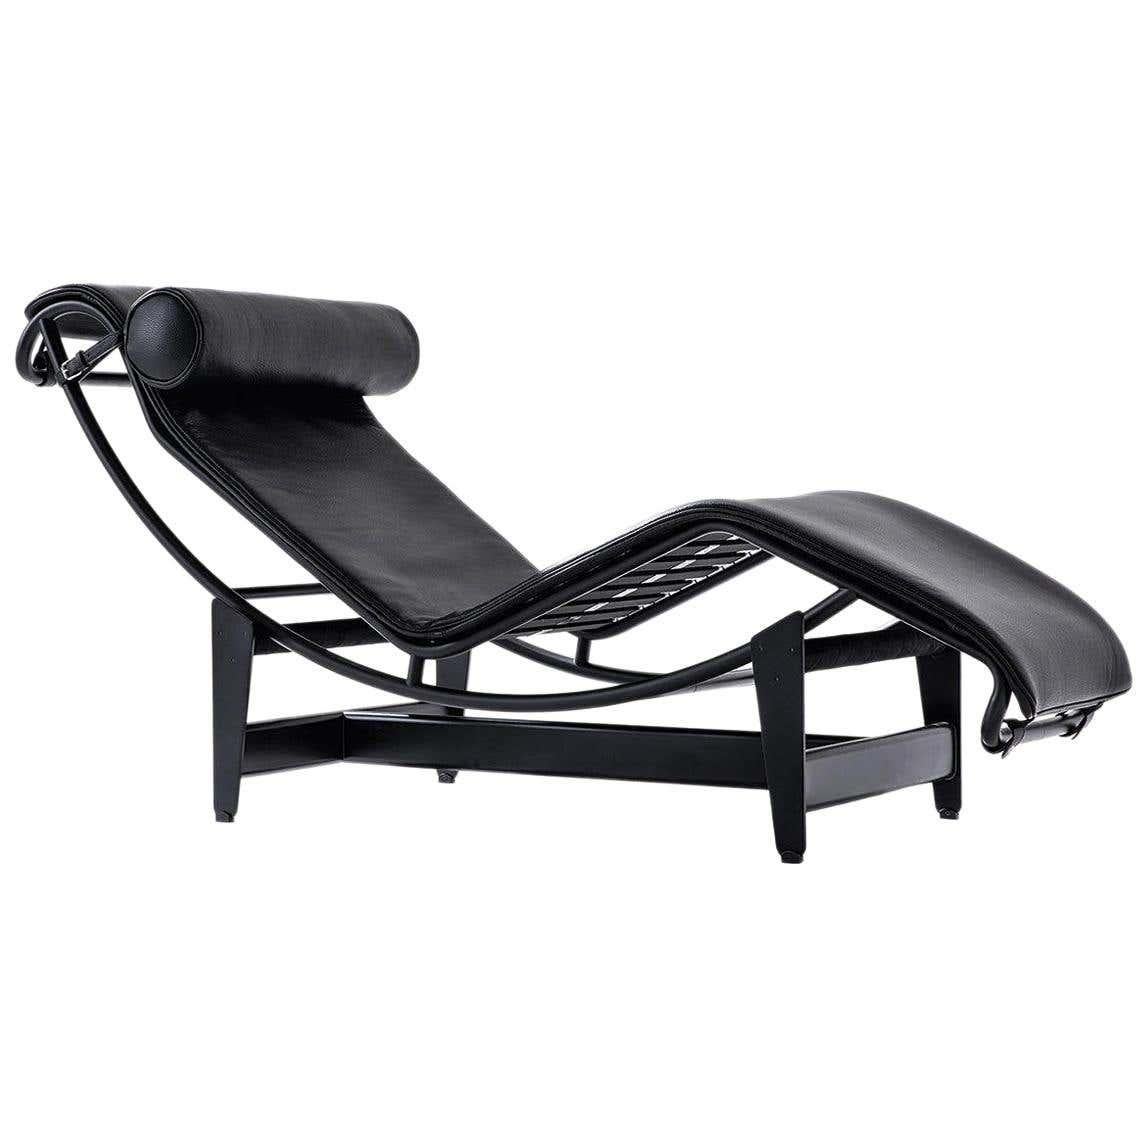 Le Corbusier, P.Jeanneret, Charlotte Perriand Lc4 Noire Chaise Lounge by Cassina In New Condition For Sale In Barcelona, Barcelona